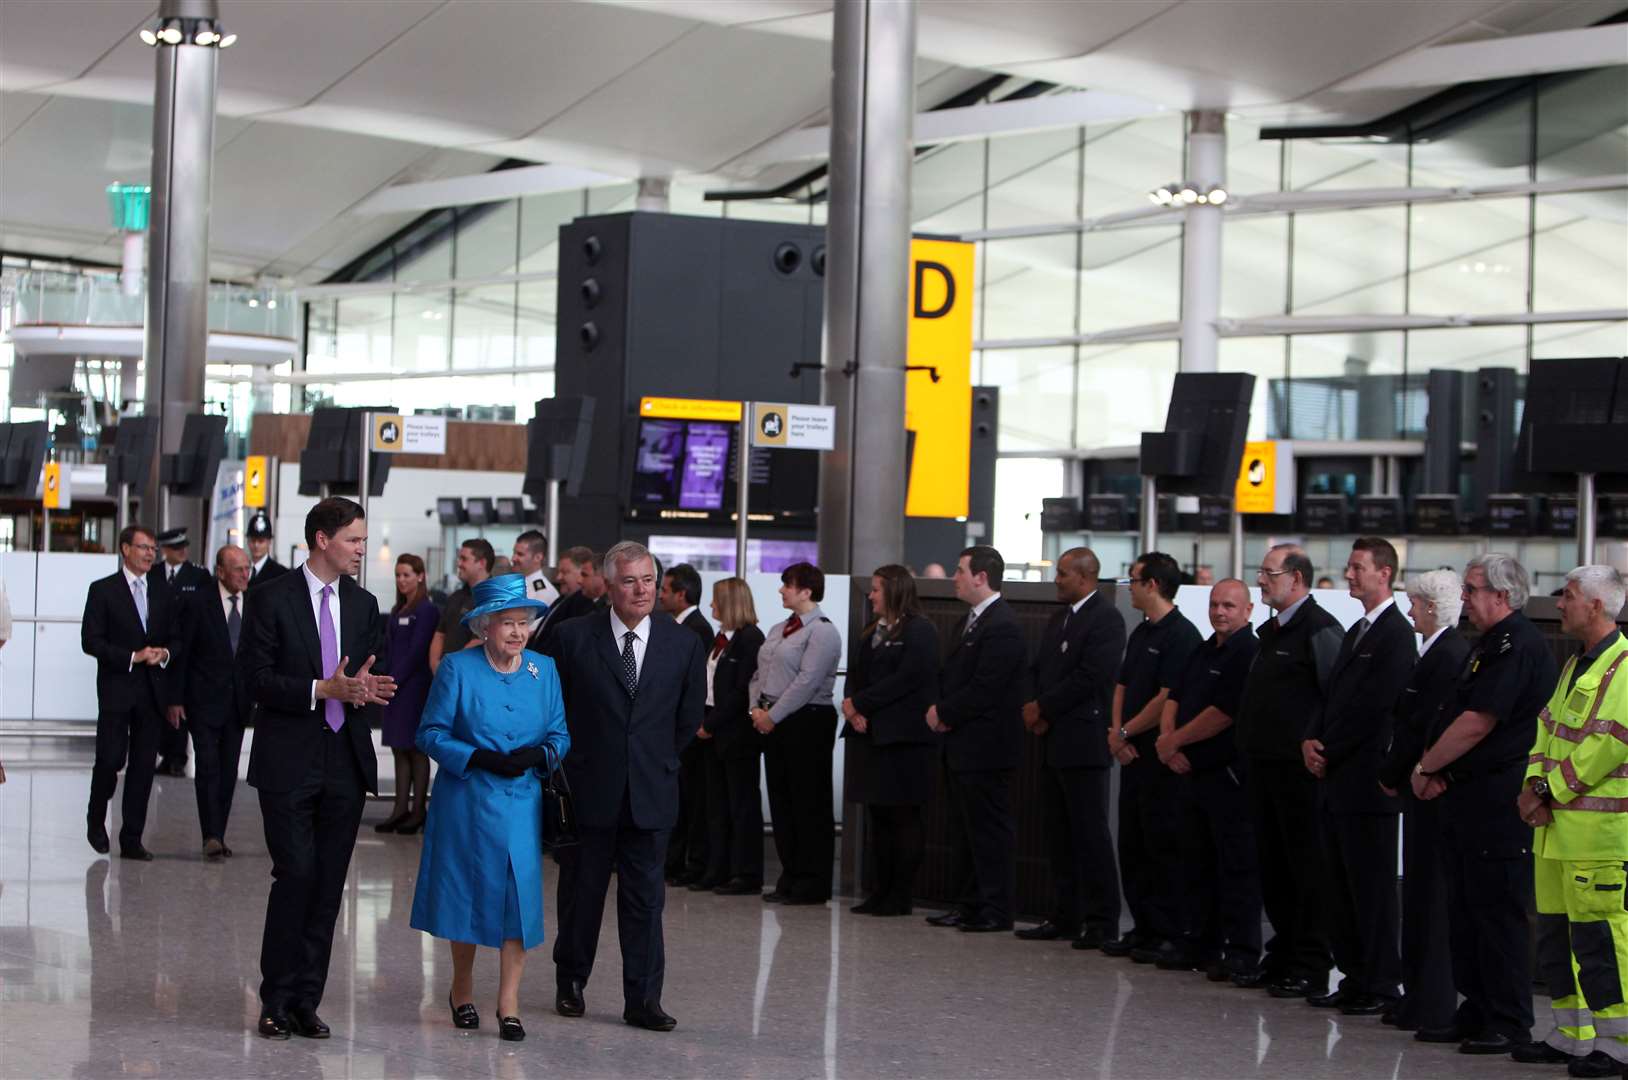 The Queen opened the rebuilt Terminal 2 in 2014 (Steve Parsons/PA)